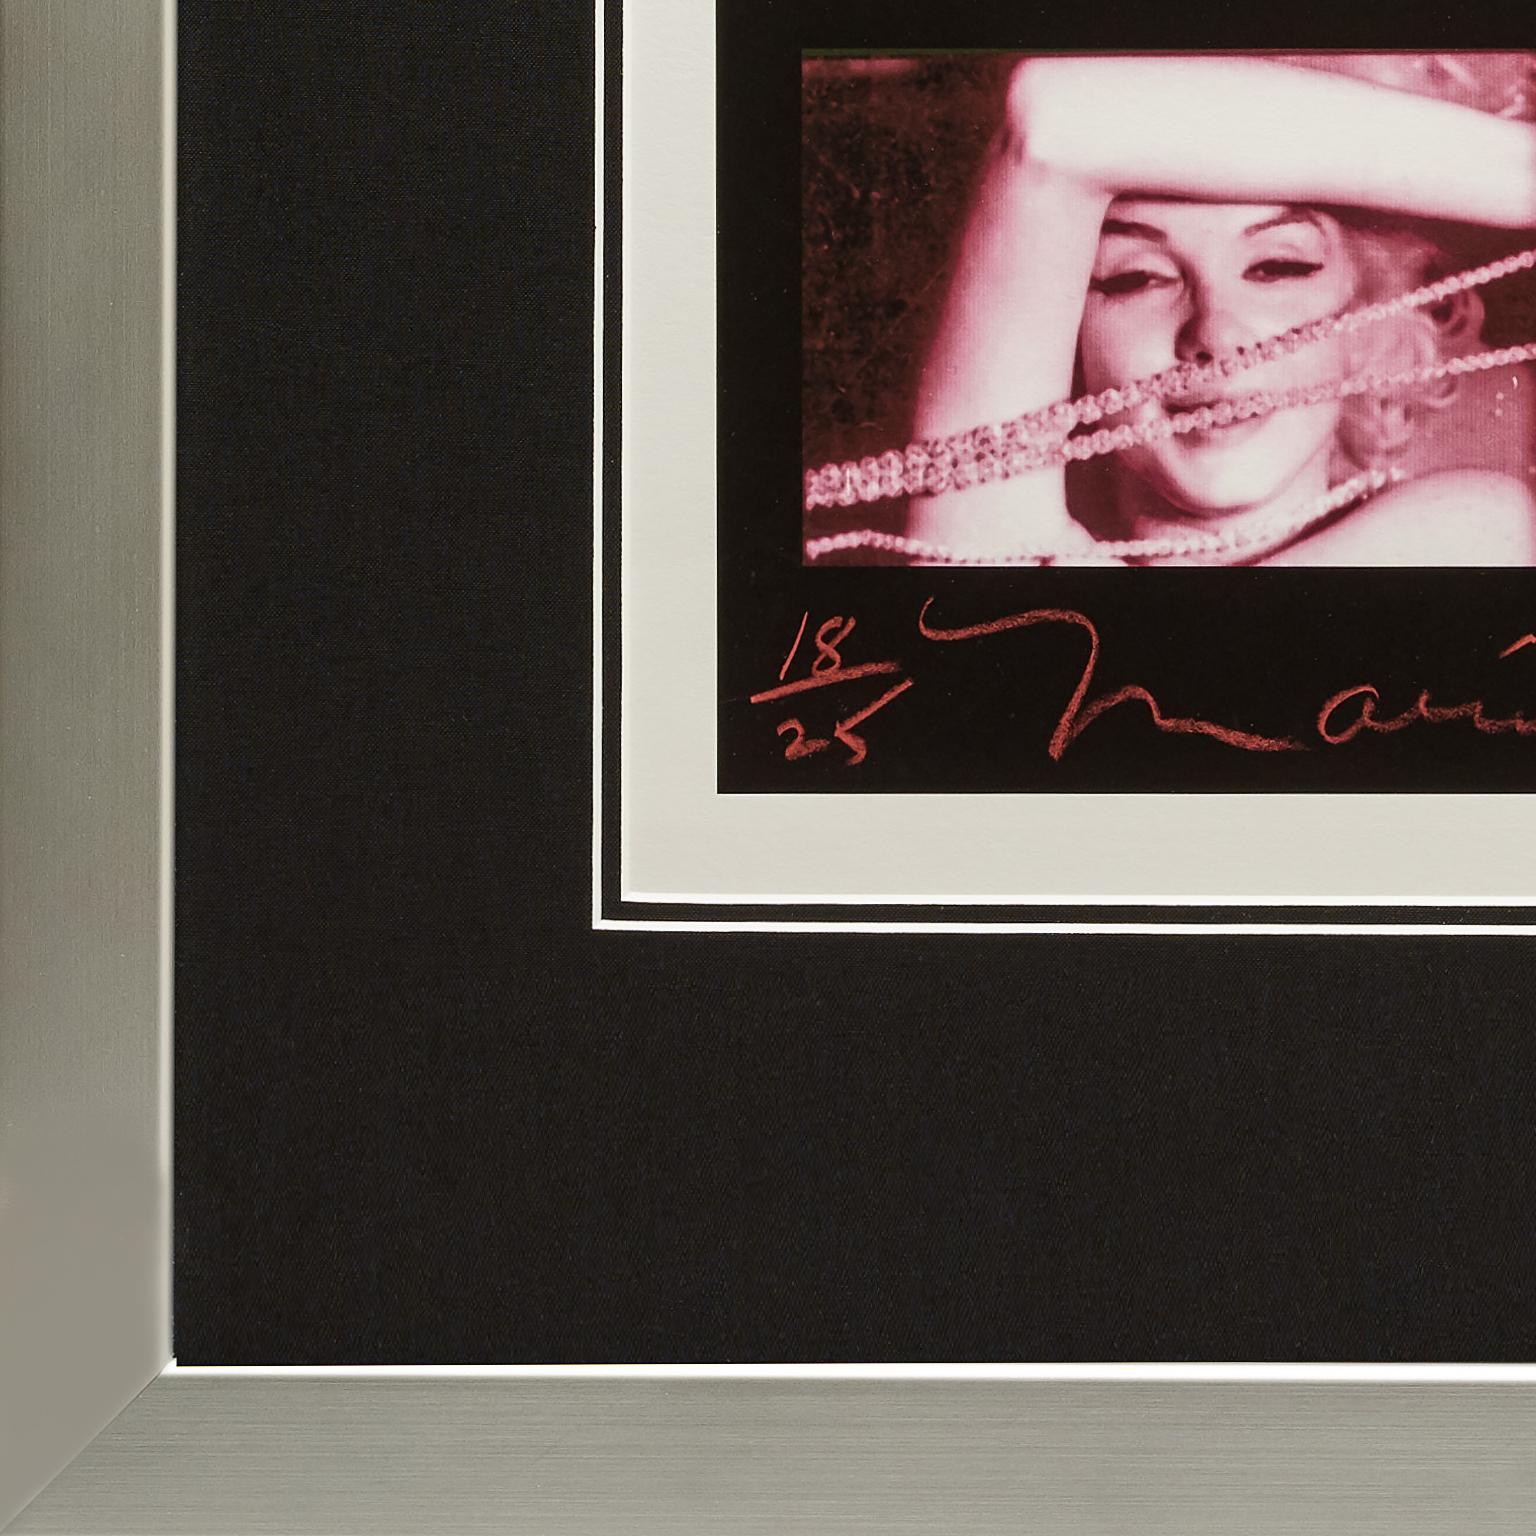 A beautiful archival pigment print showcasing four complimentary captures from Bert Stern's 'The Last Sitting' with Marilyn Monroe. The work is numbered in red lower left ‘18/25’ and inscribed 'Marilyn' by the artist in the red lower margin.

This